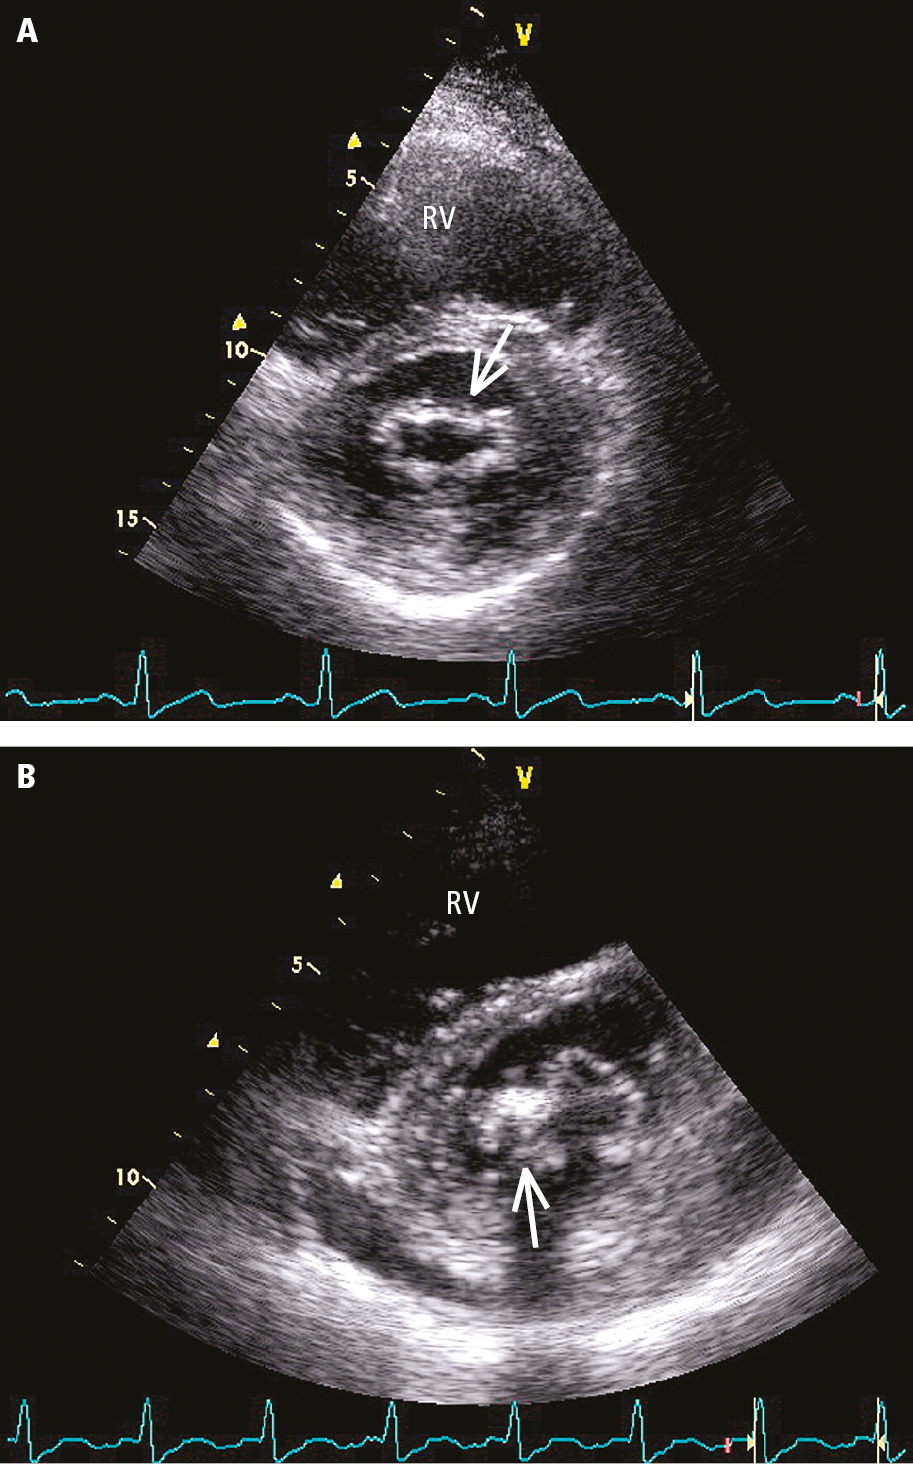 Figure 031_3861.  Transthoracic echocardiography (TTE) (parasternal short-axis view above the mitral valve orifice) of a patient with mitral valve stenosis:   A  , mild, evenly distributed fibrosis of mitral valve leaflets (arrow);   B  , localized thickening and fibrosis of mitral valve leaflets, calcification of the posterior commissure (arrow). RV, right ventricle.  